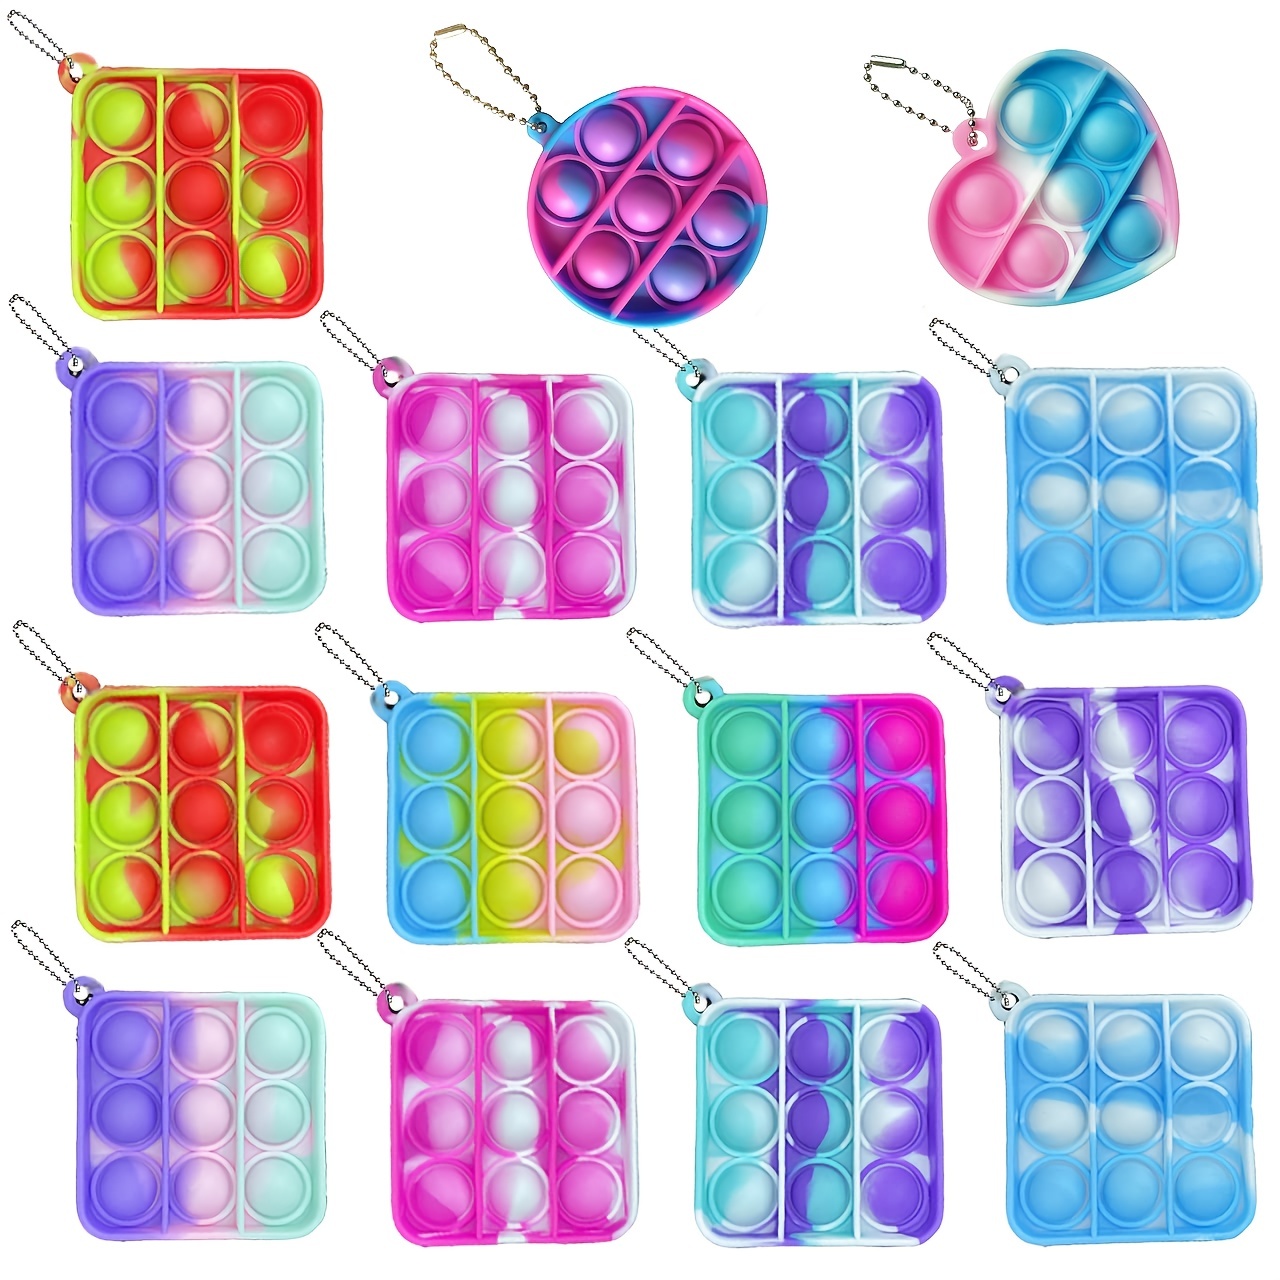  2 Pack Simple Fidget Toy Keychains,Mini Stitch Pop Fidget Toy  Stress Relief Hand Toys Keychain Push Pop Bubble Sensory Toy Wrap Pop  Anxiety Stress Reliever Office Desk Toy for Kids Adult(Blue,Pink) 